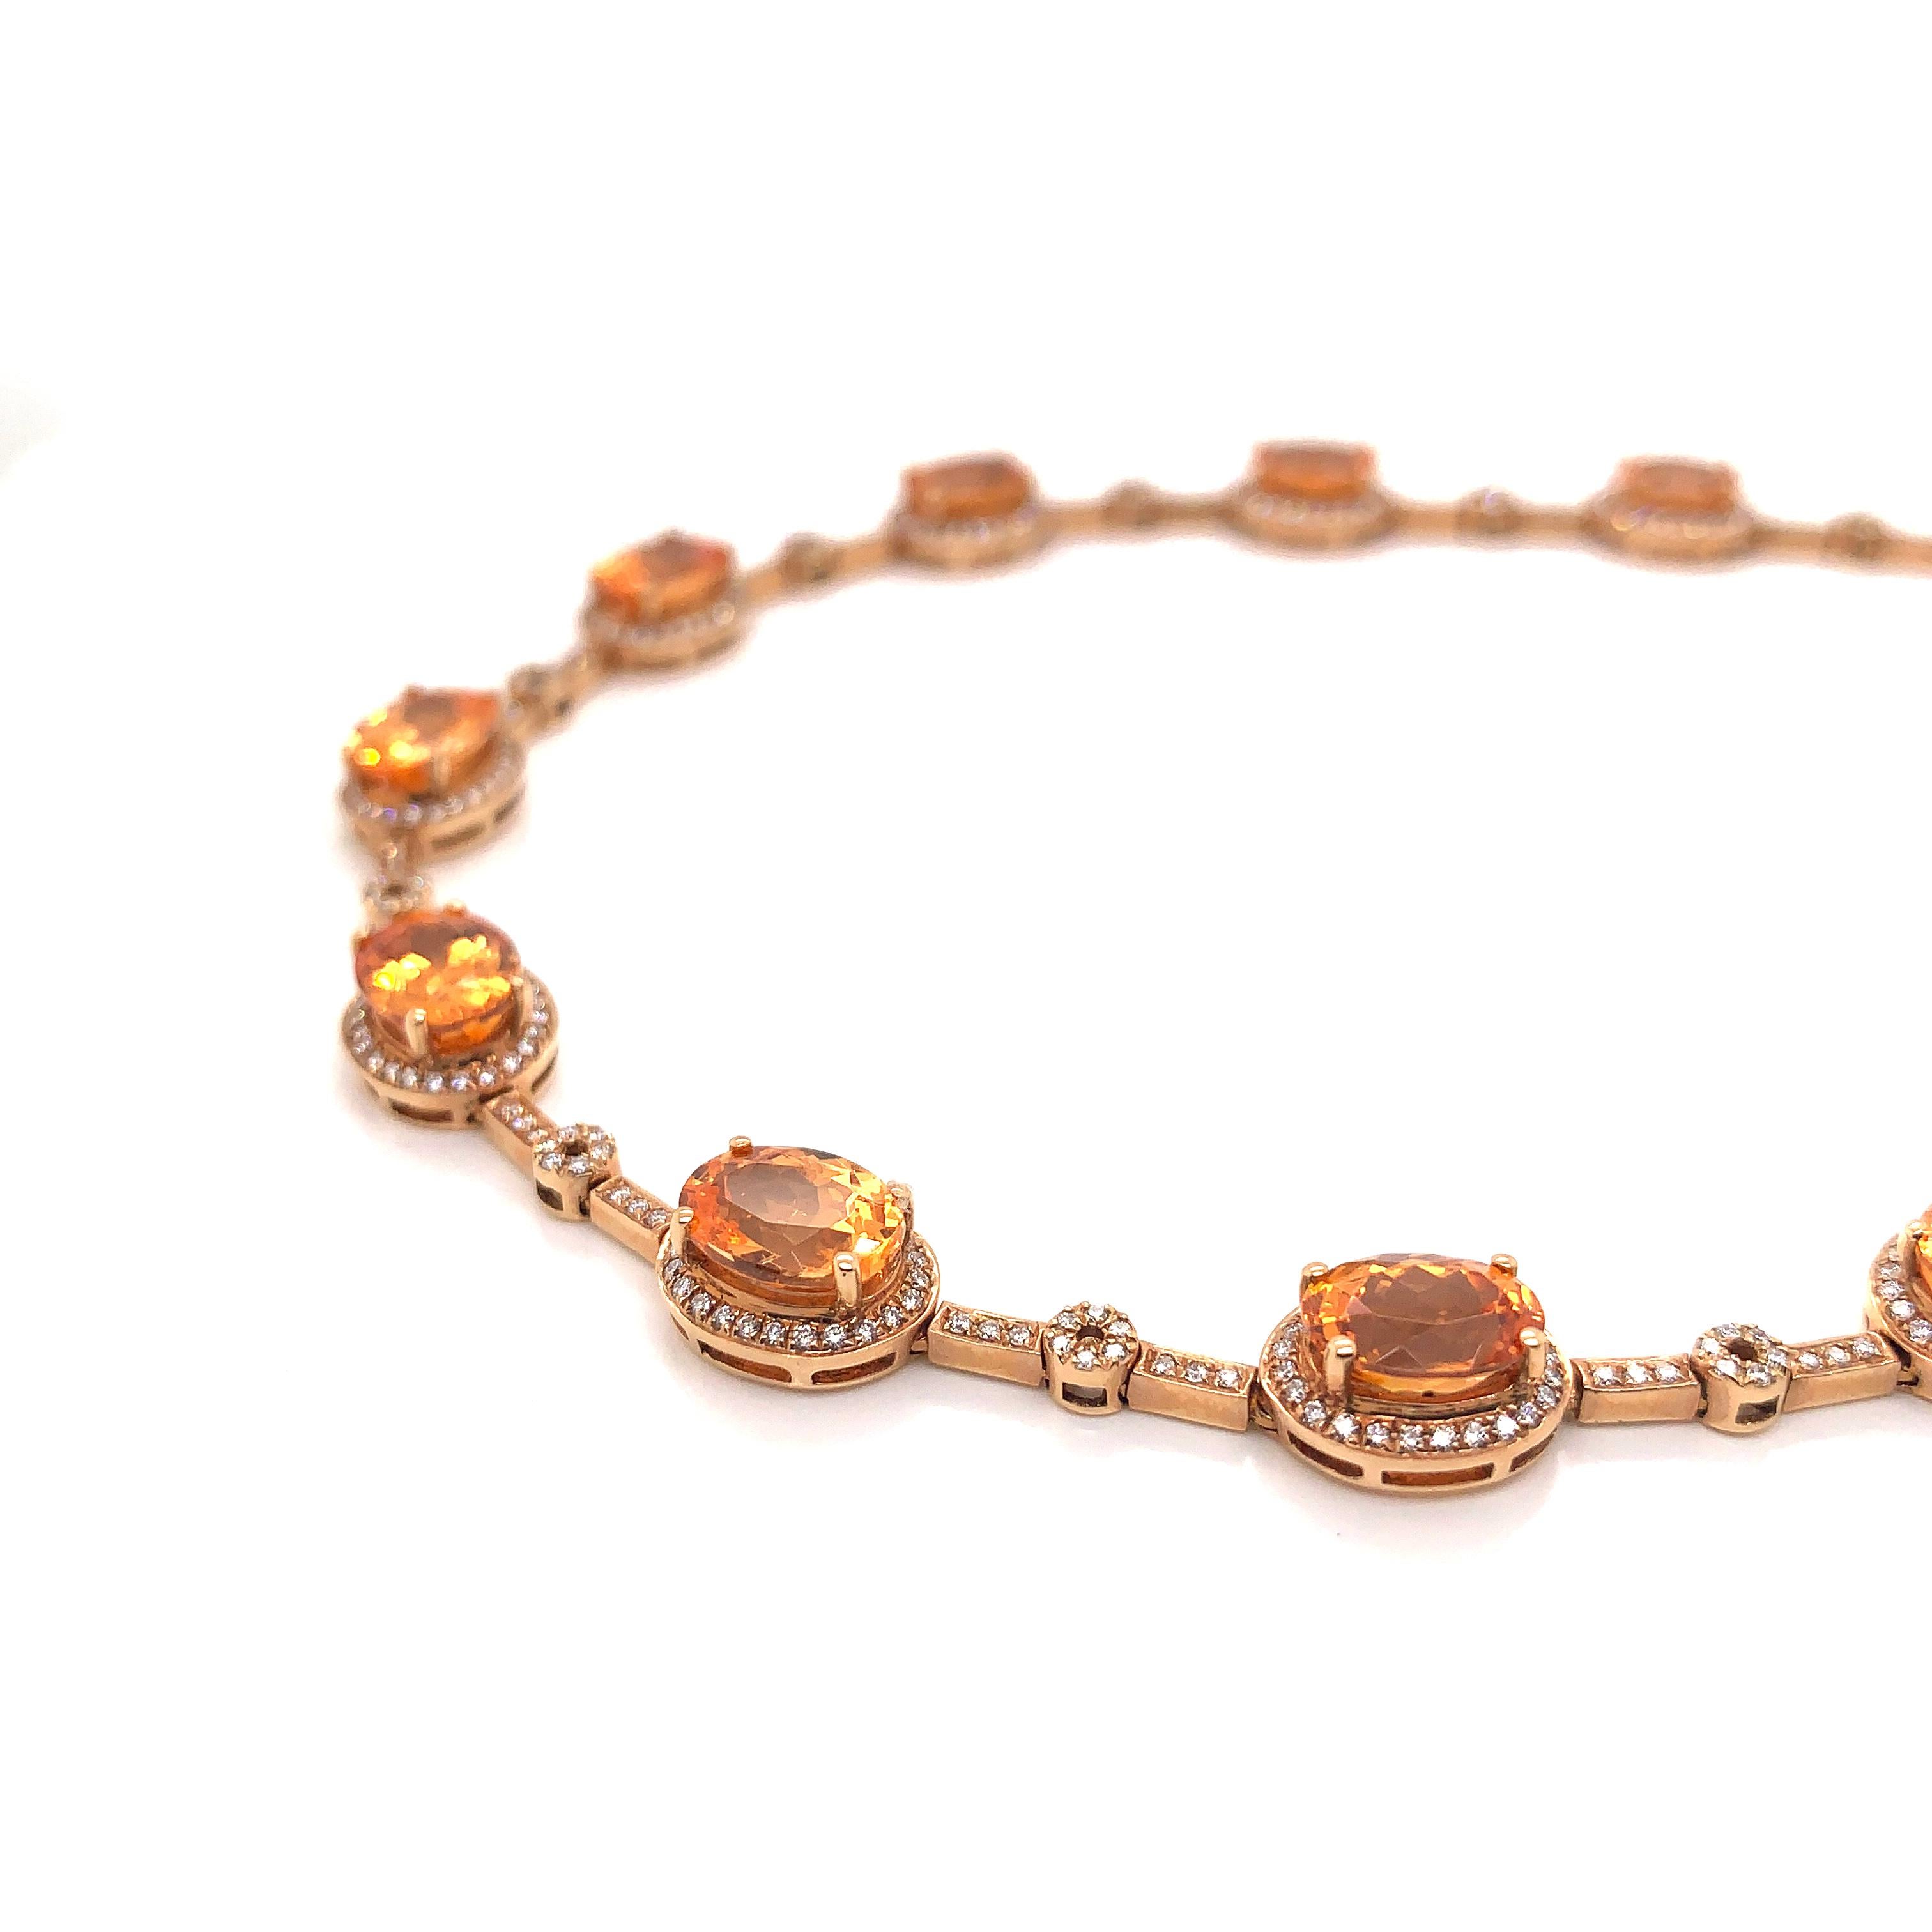 If you like to indulge in sweets, then you're definitely going to fall in love with these candy like 'jelly-bean' spessartites! This particular necklace showcases vibrant orange spessartites that are almost candy like! 

Designer spessartite